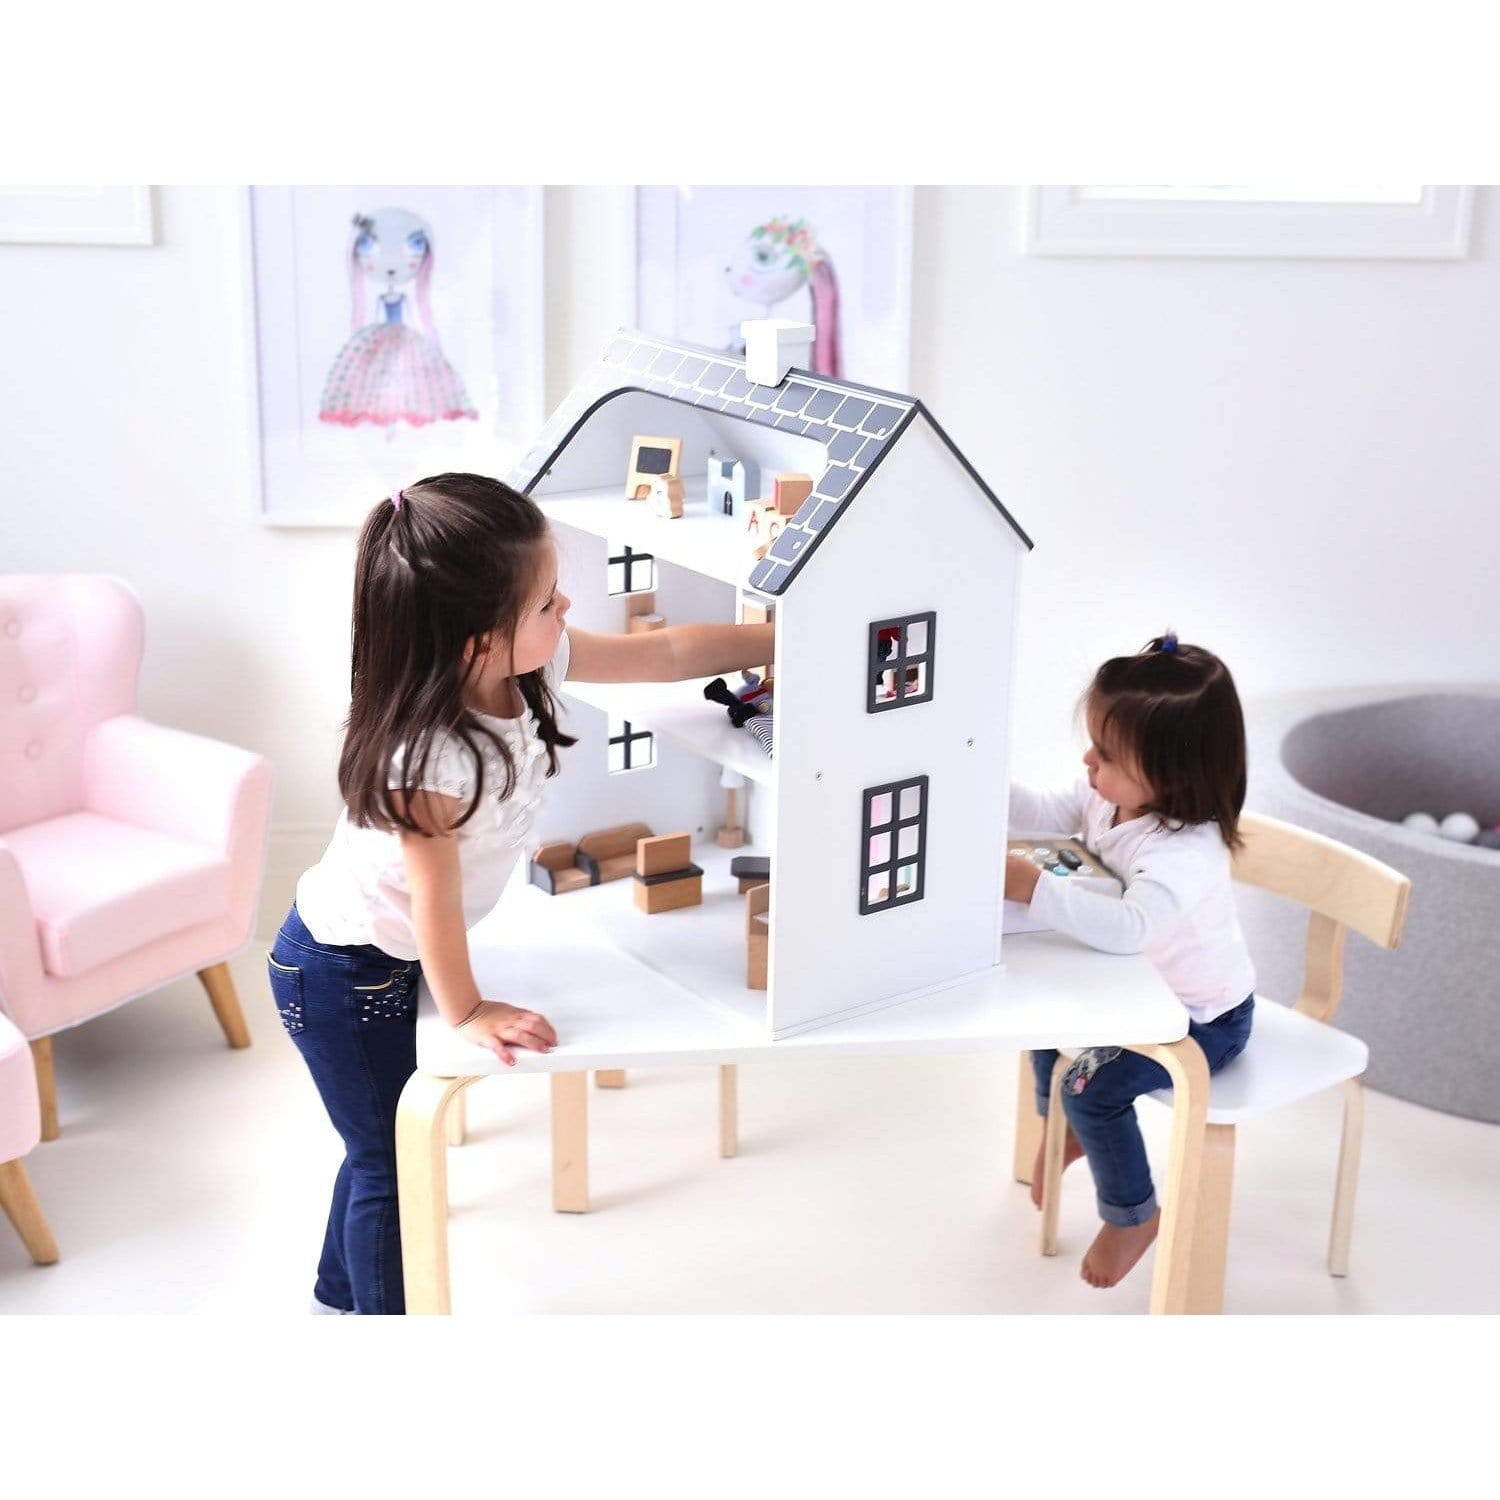 Wooden Doll Houses & Imaginative Play – Win/Win For Parents & Kids!